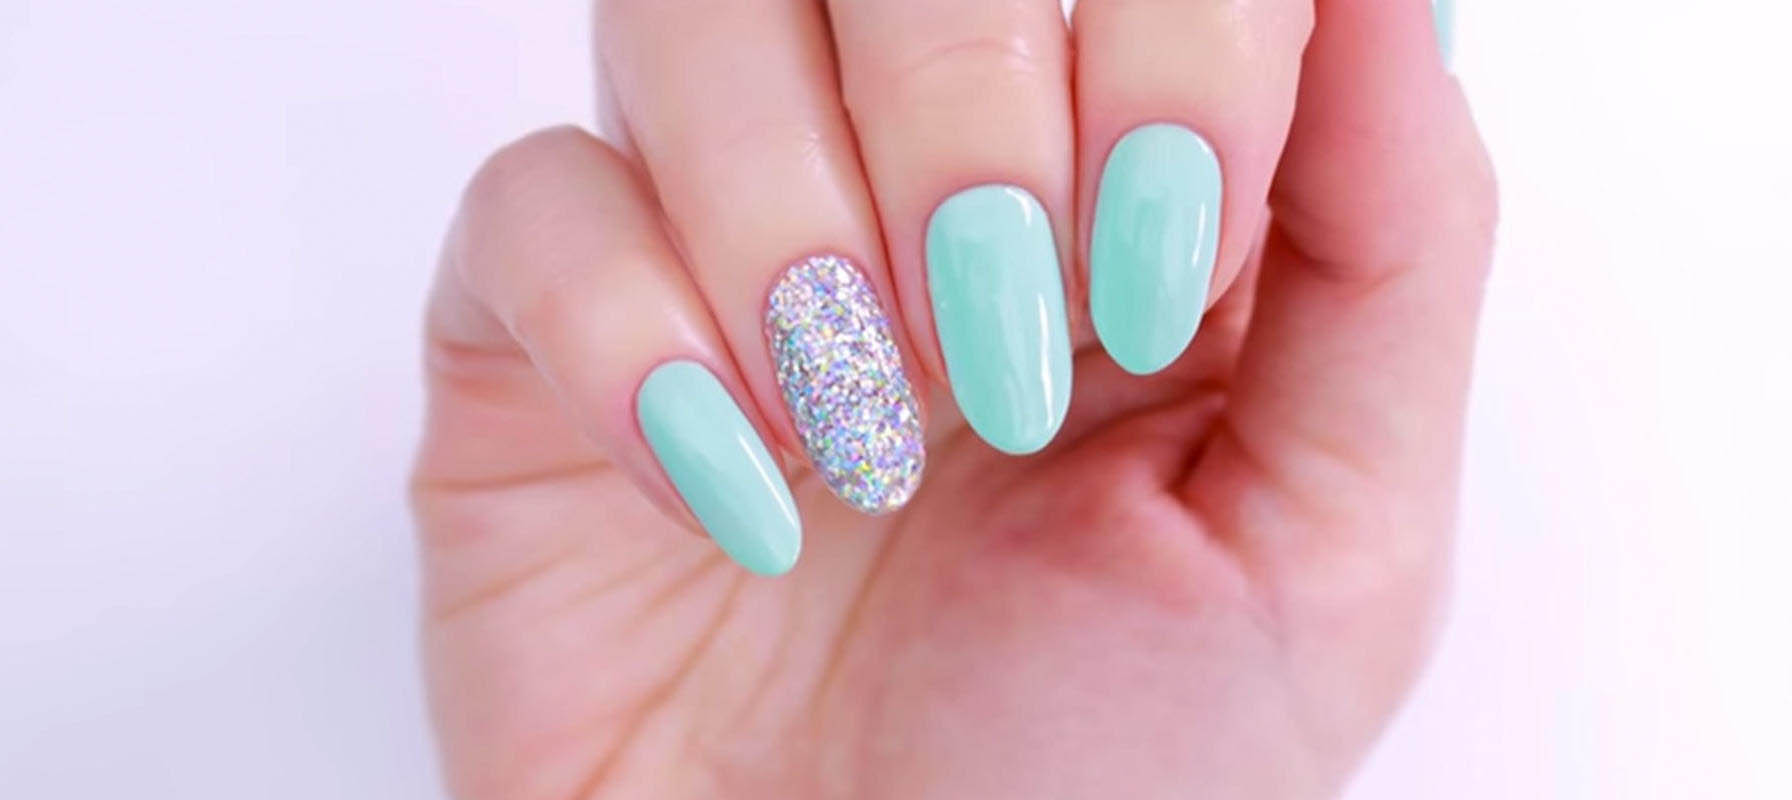 How to Make Your Nail Polish Dry Faster - wide 5